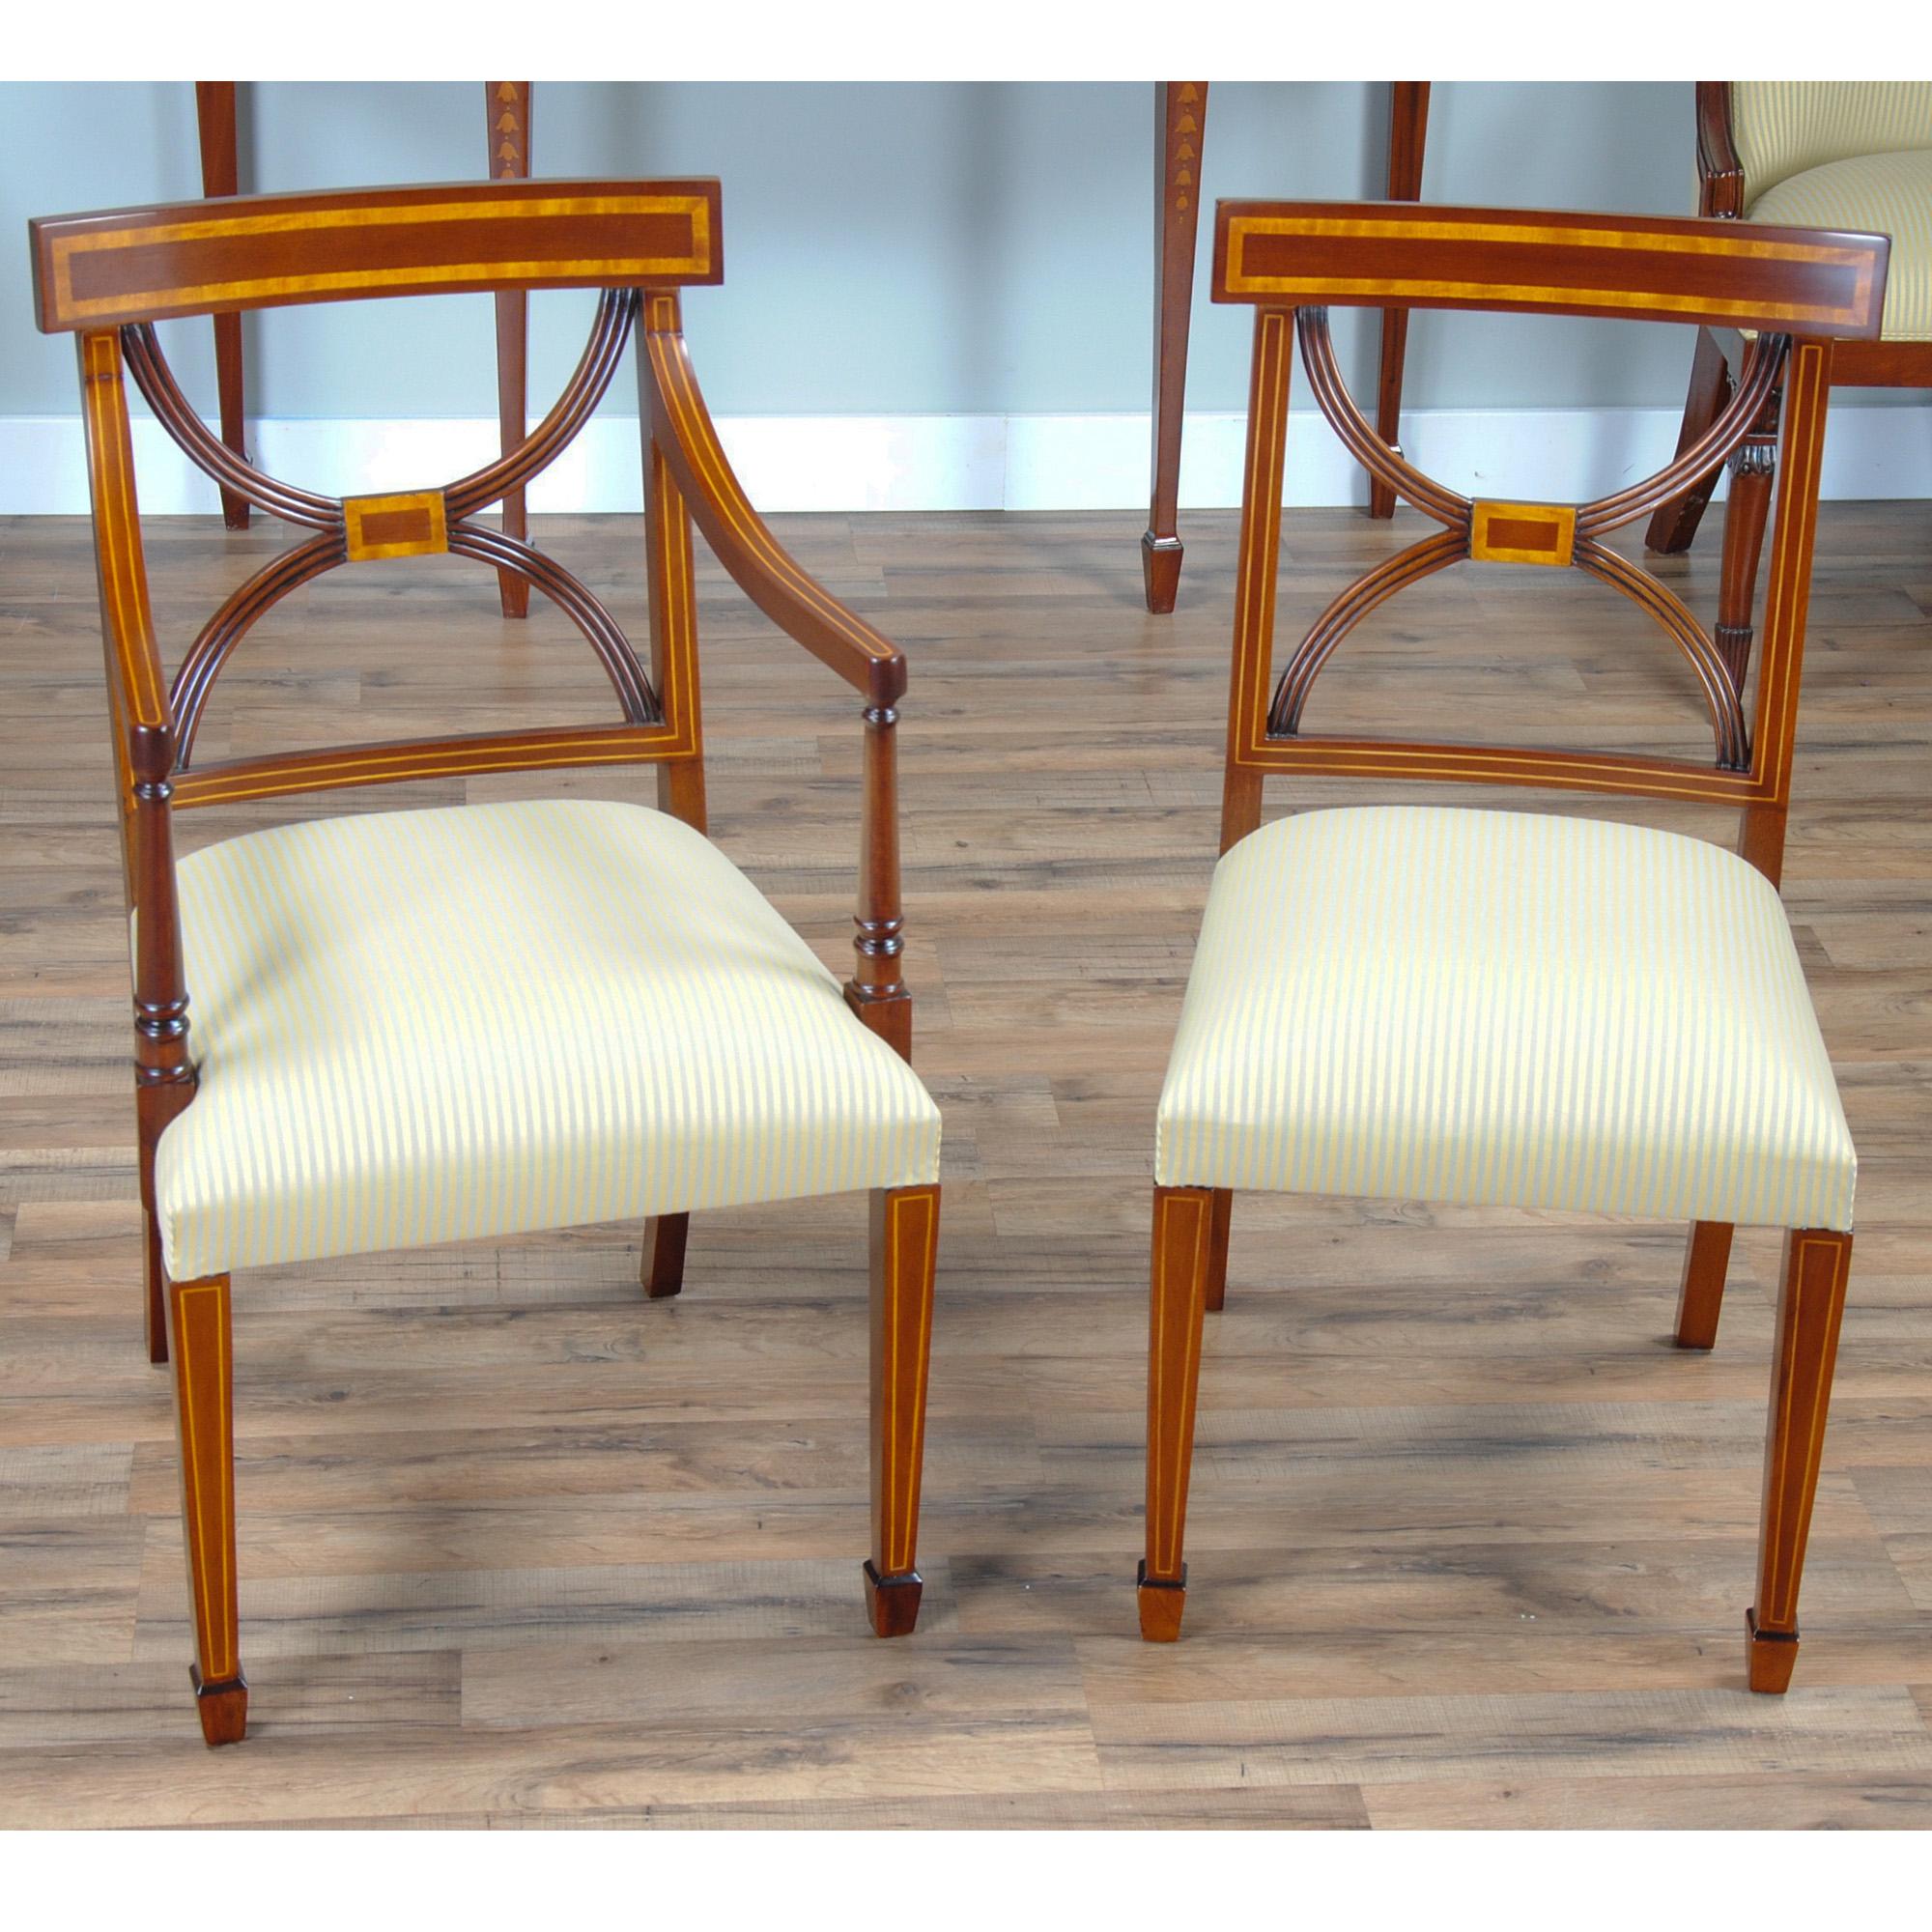 Sheraton Inlaid Mahogany Chairs, Set of 10 For Sale 8